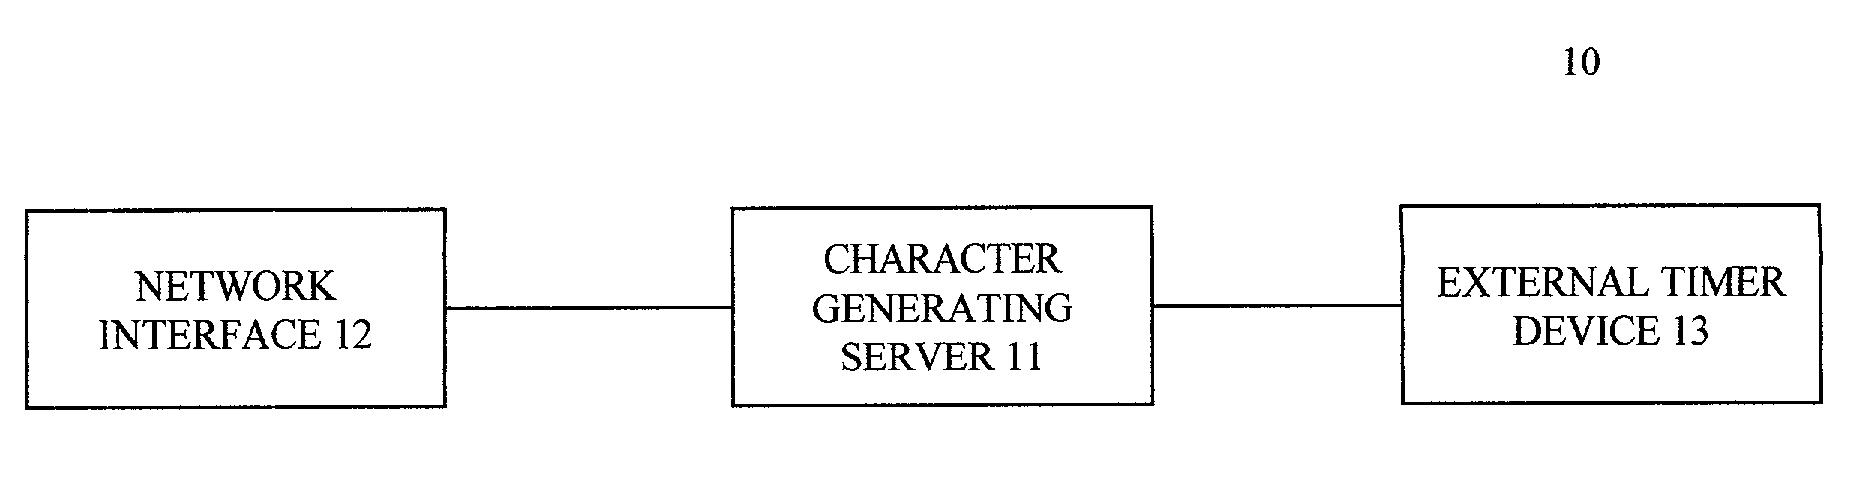 Method and apparatus for generating a group of character sets that are both never repeating within certain period of time and difficult to guess